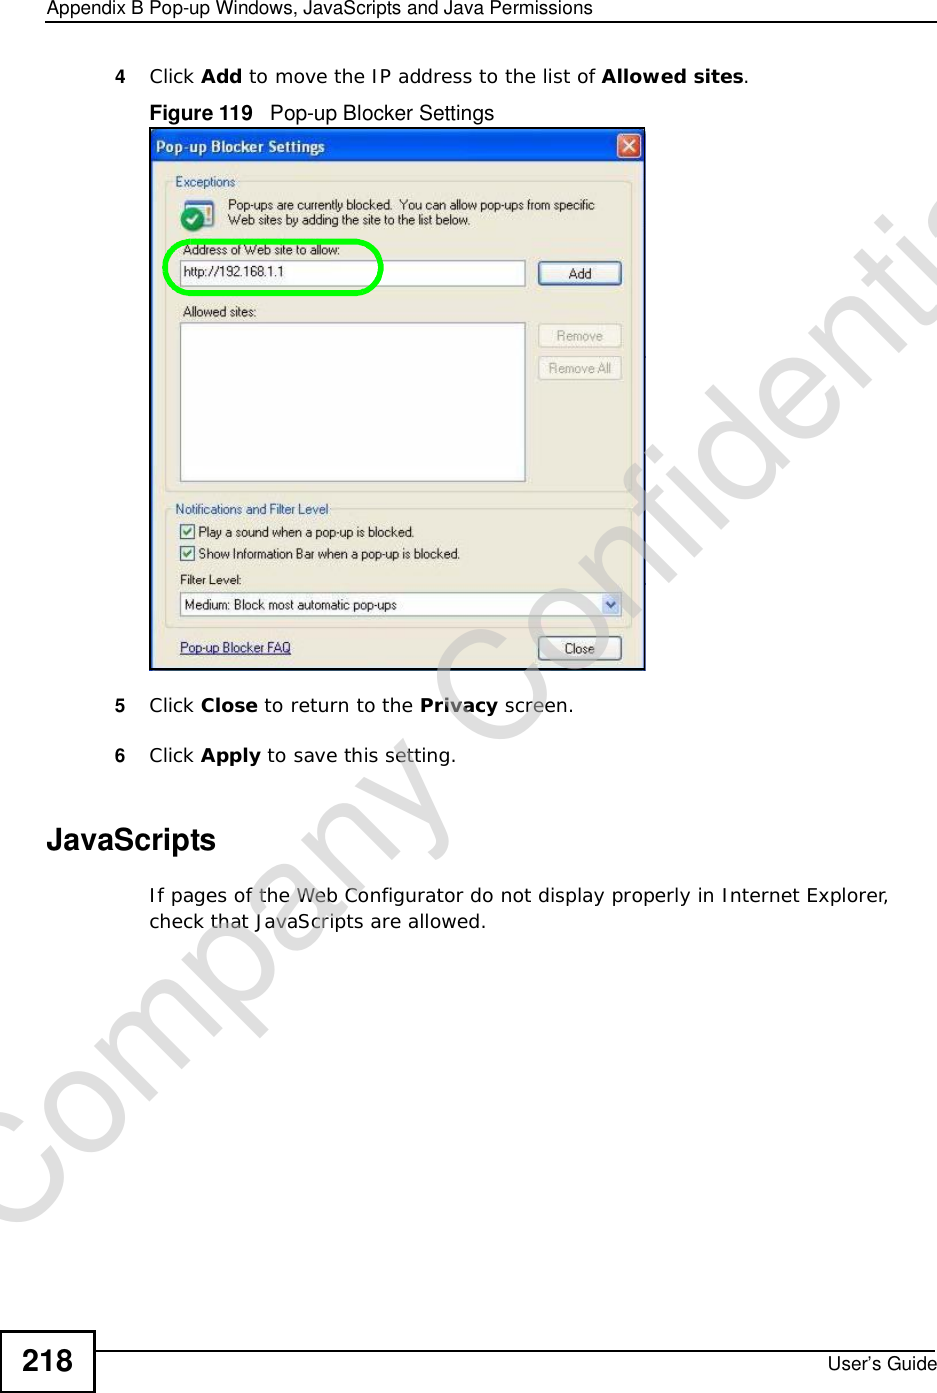 Appendix BPop-up Windows, JavaScripts and Java PermissionsUser’s Guide2184Click Add to move the IP address to the list of Allowed sites.Figure 119   Pop-up Blocker Settings5Click Close to return to the Privacy screen. 6Click Apply to save this setting. JavaScriptsIf pages of the Web Configurator do not display properly in Internet Explorer, check that JavaScripts are allowed. Company Confidential